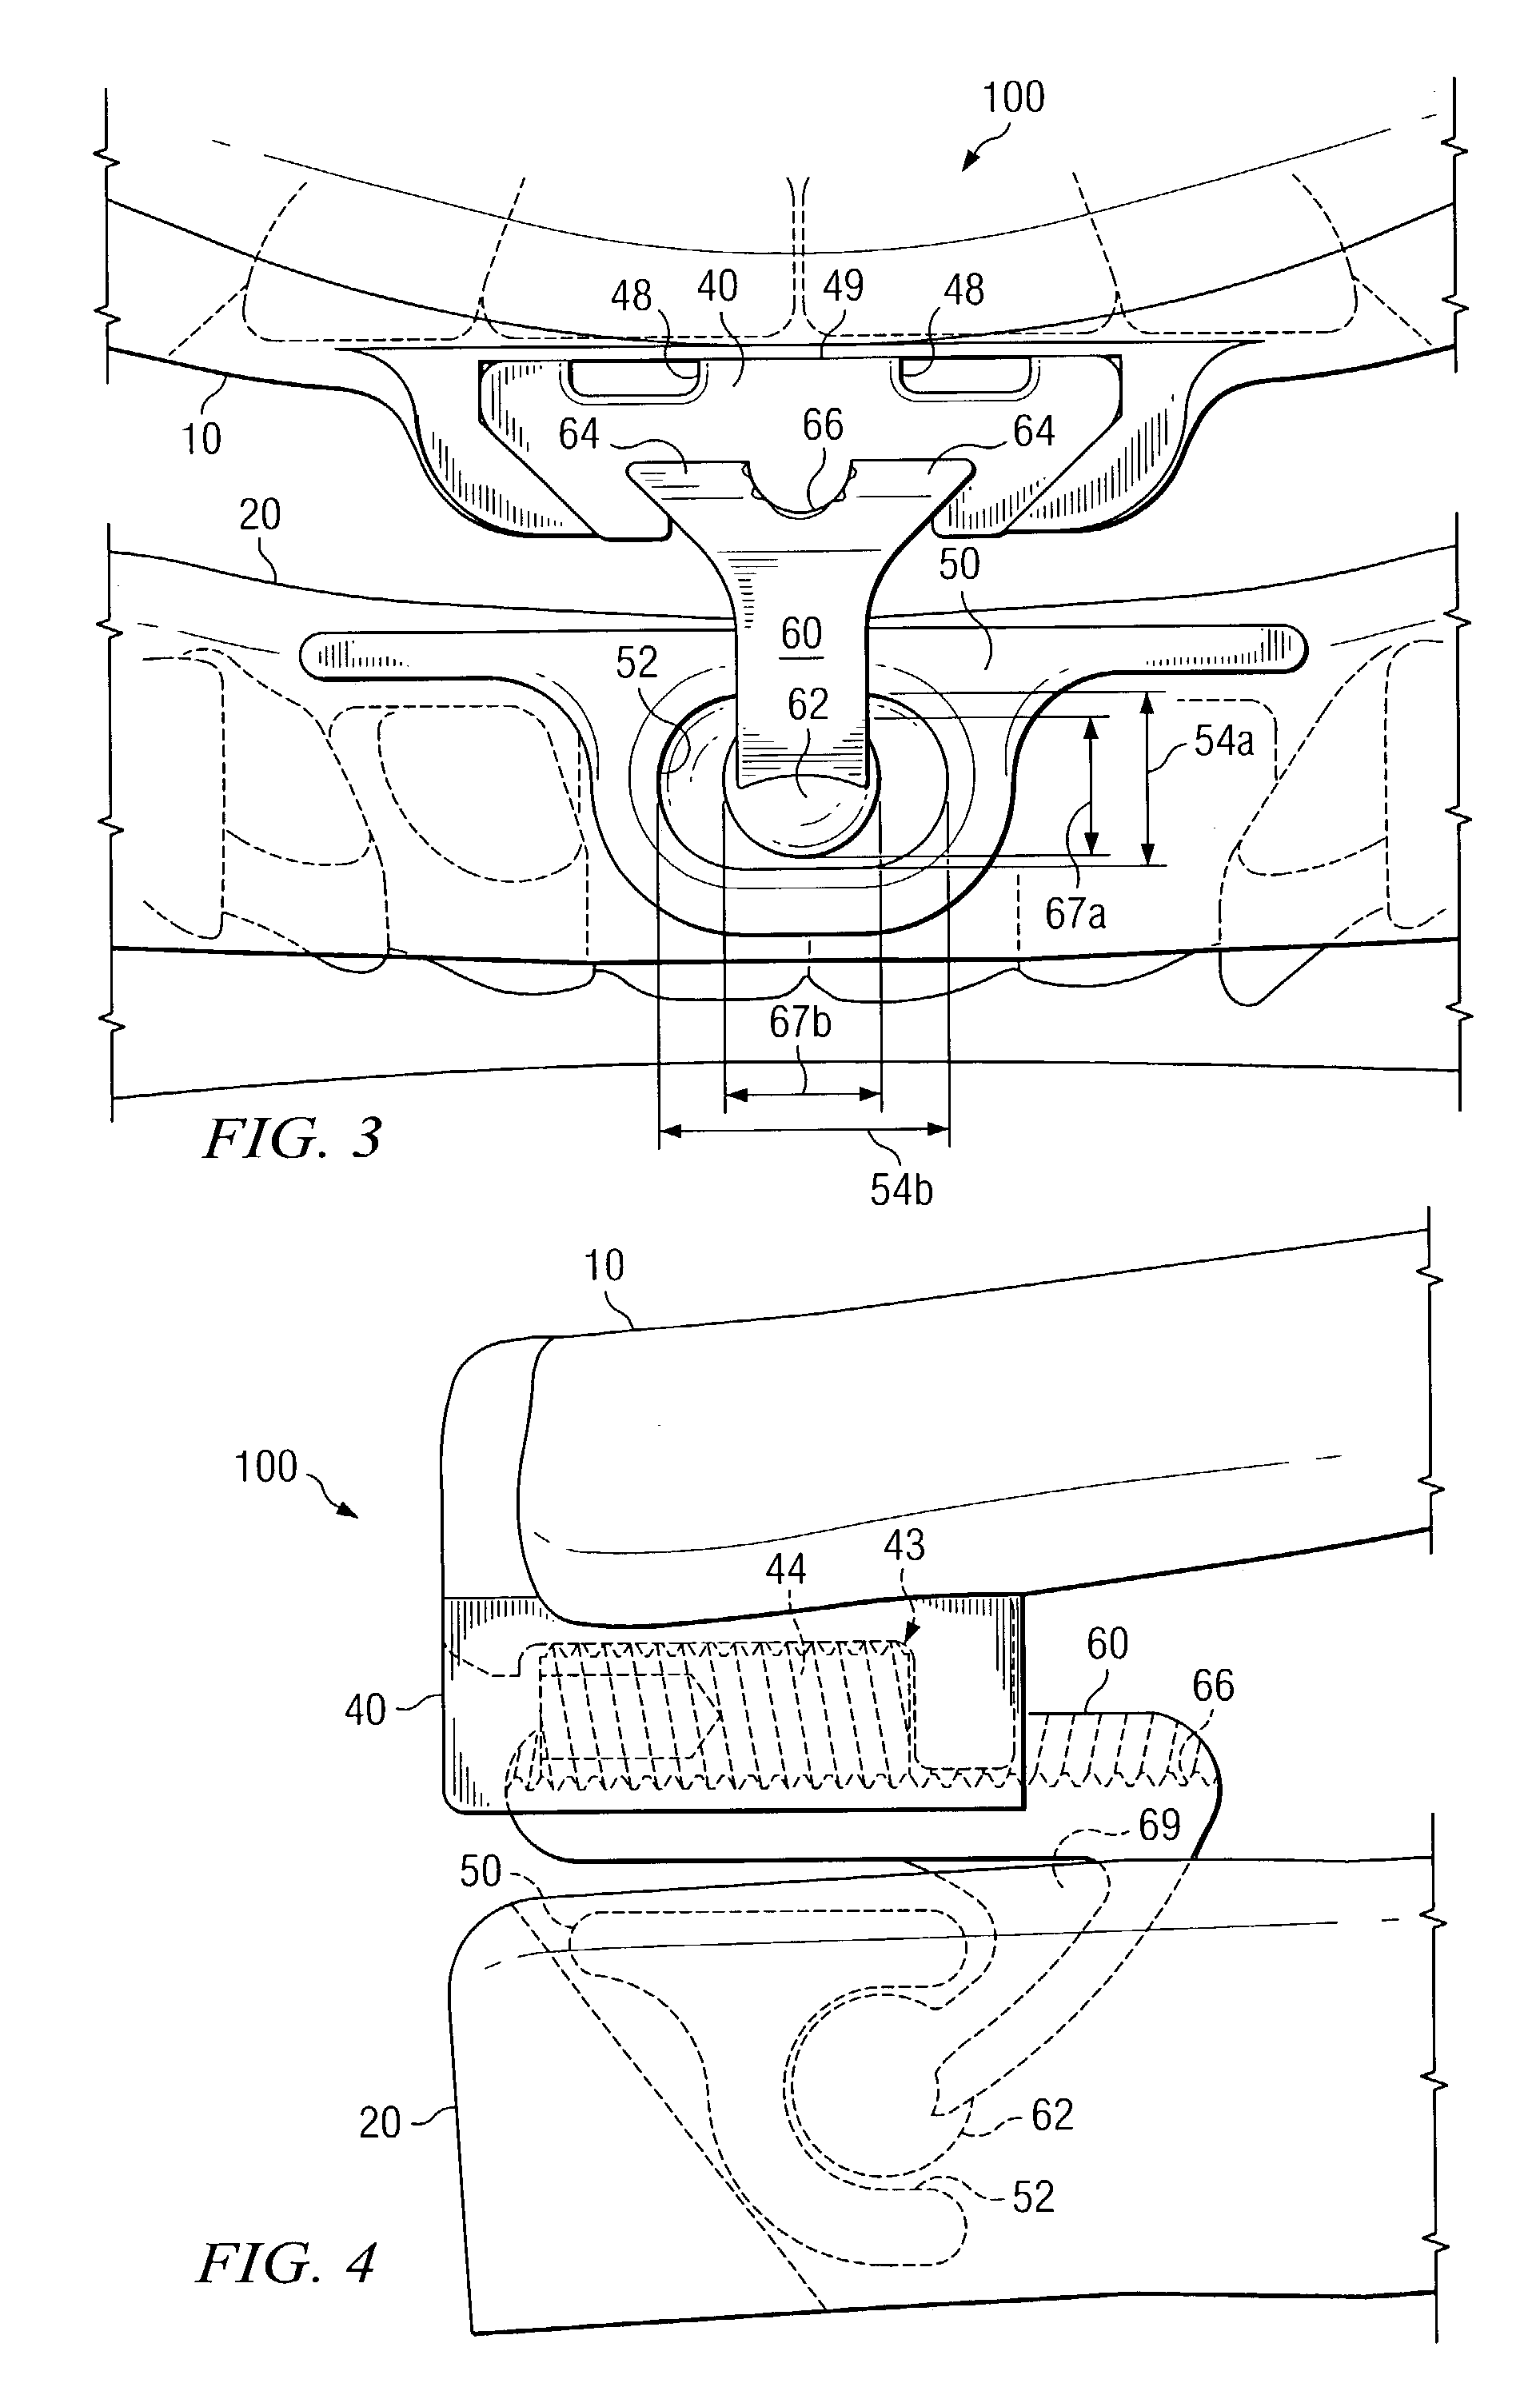 Device and method for improving a user's breathing